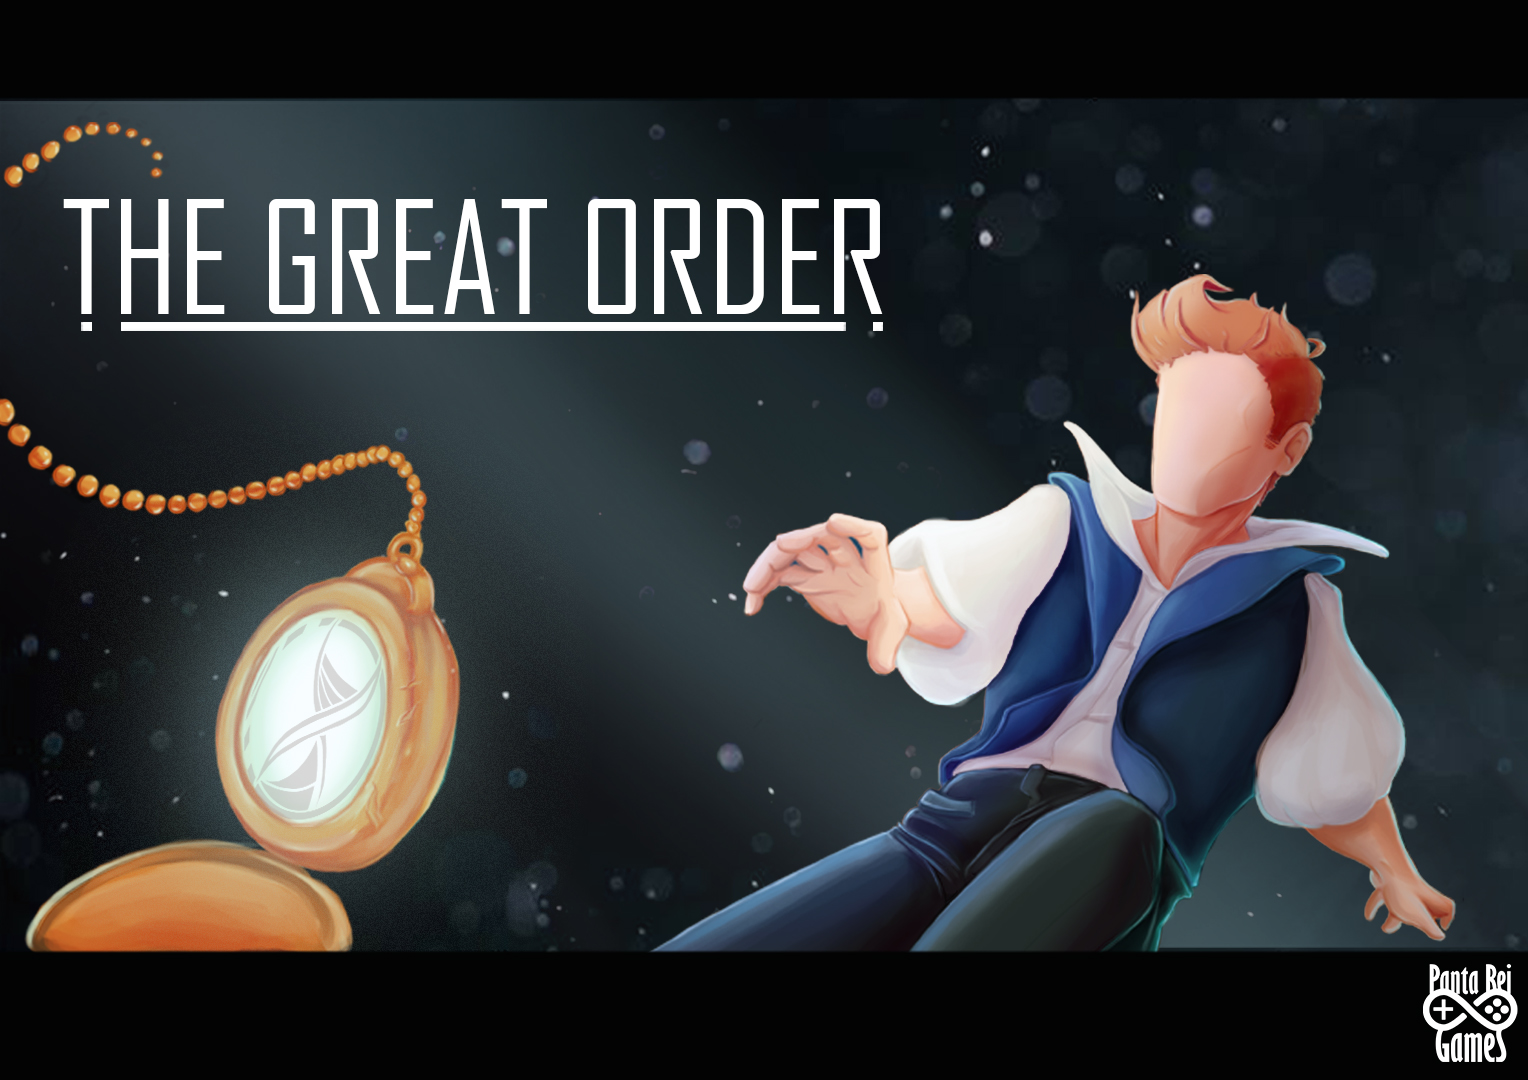 The Great Order